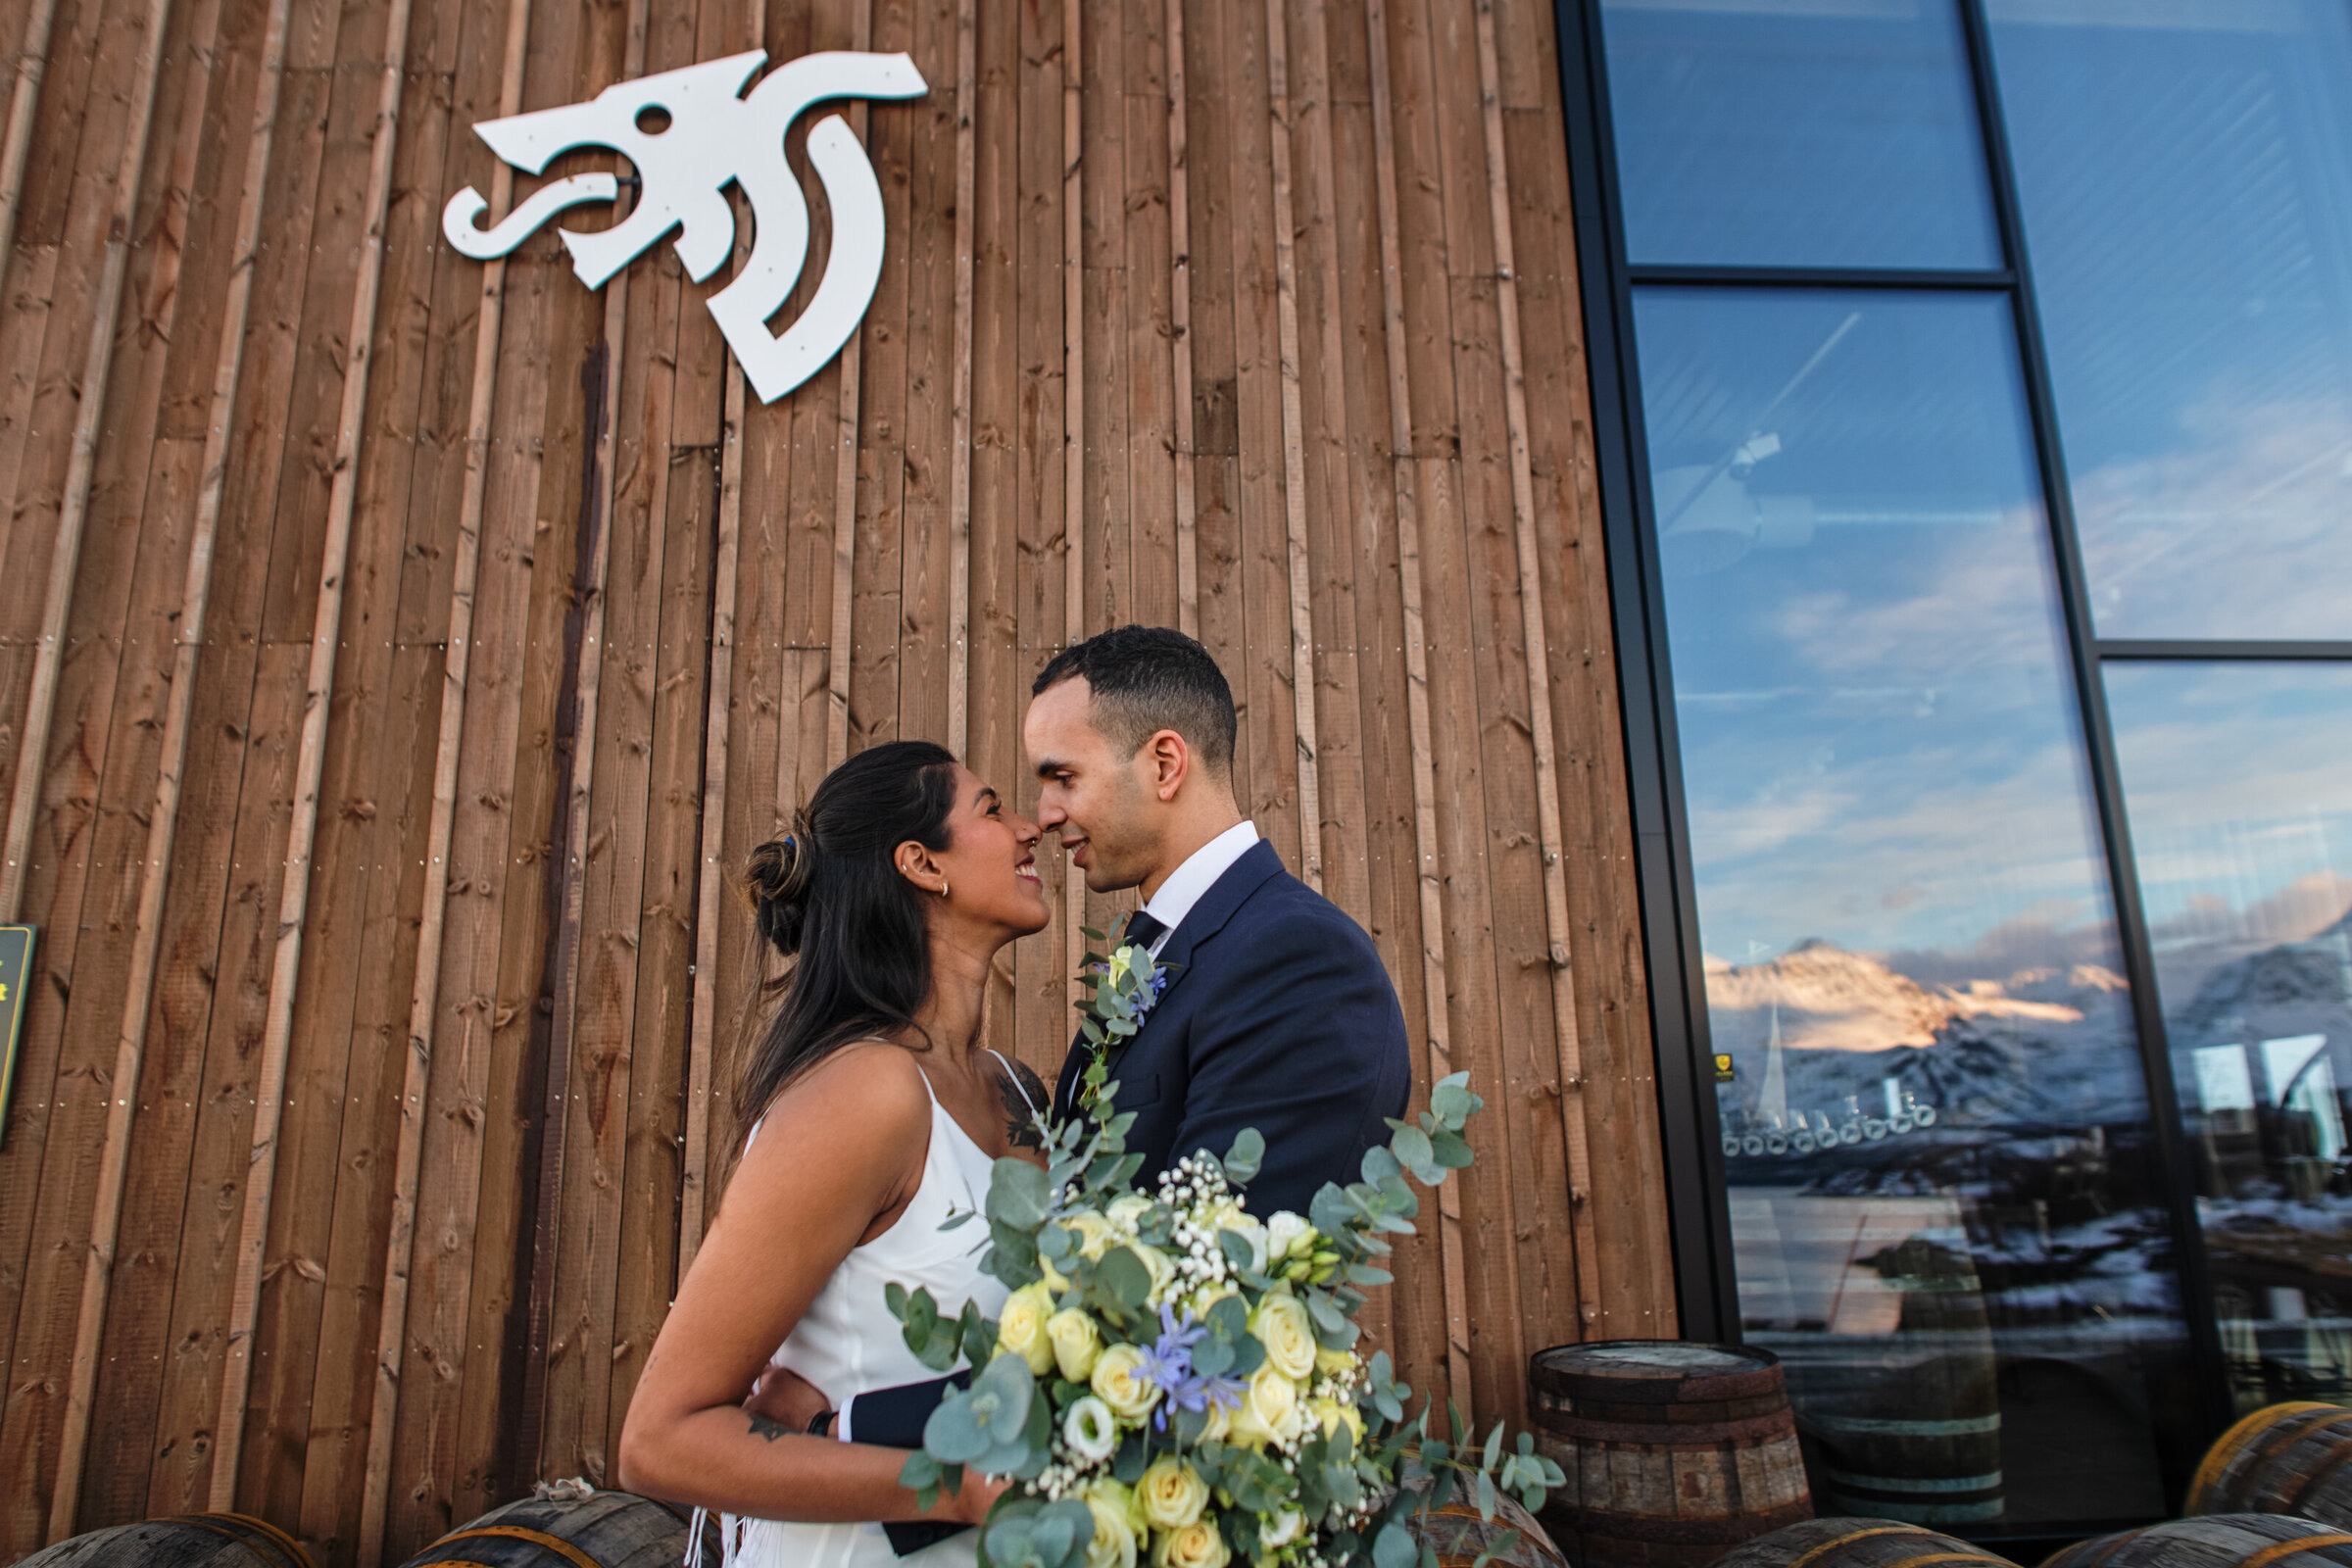 A close embrace between the bride and groom outside Aurora spirit distillery in Lyngen, Norway. Highlighting their unique elopement location, the bride also holds a bouquet of locally sourced and designed flowers, showcasing the vendor connections available with their elopement planner.